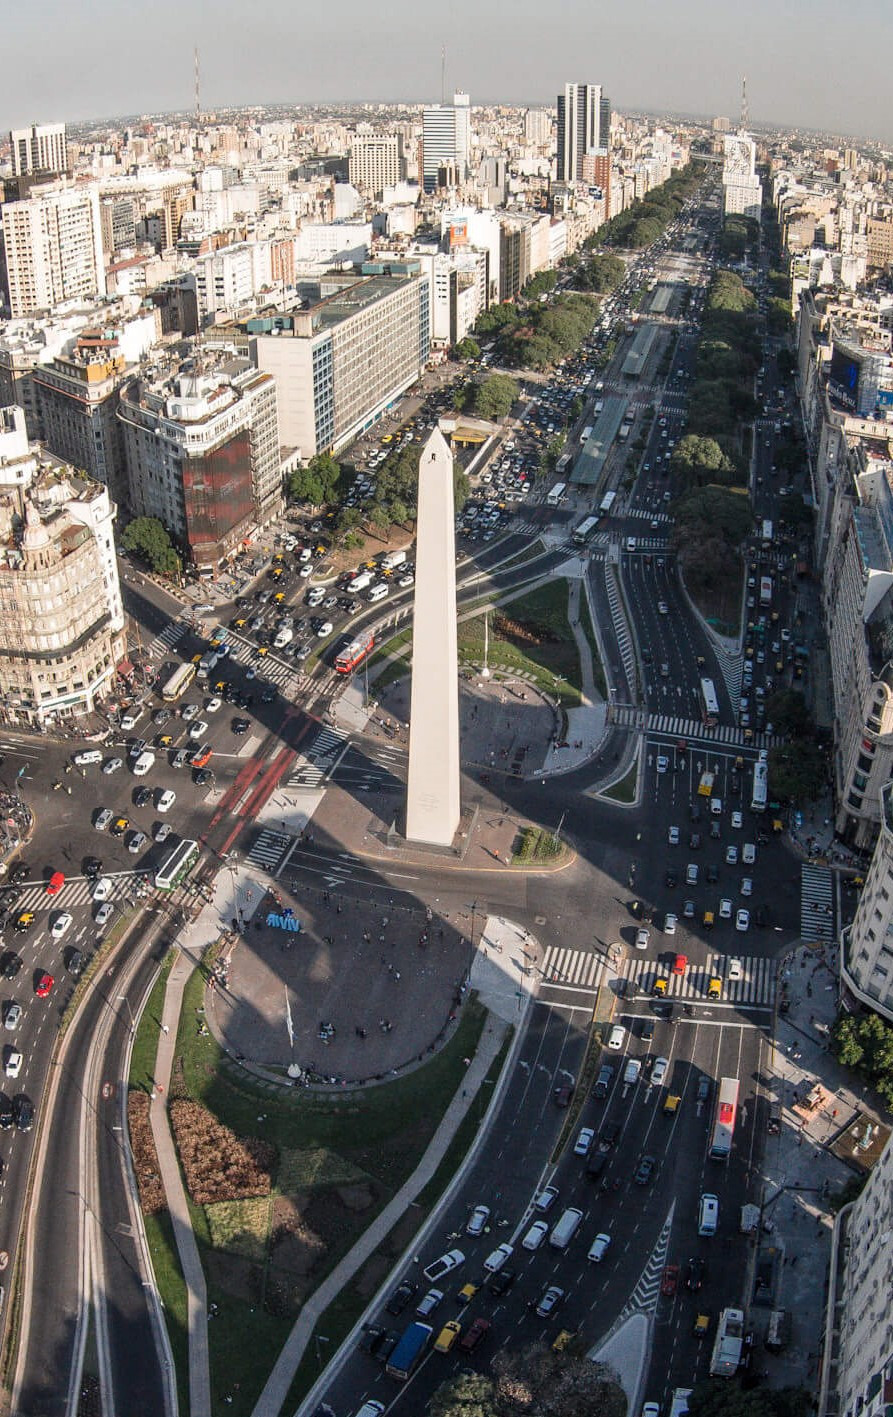 The Opening Ceremony will be held at the iconic Buenos Aires Obelisk on October 6 ©Buenos Aires 2018